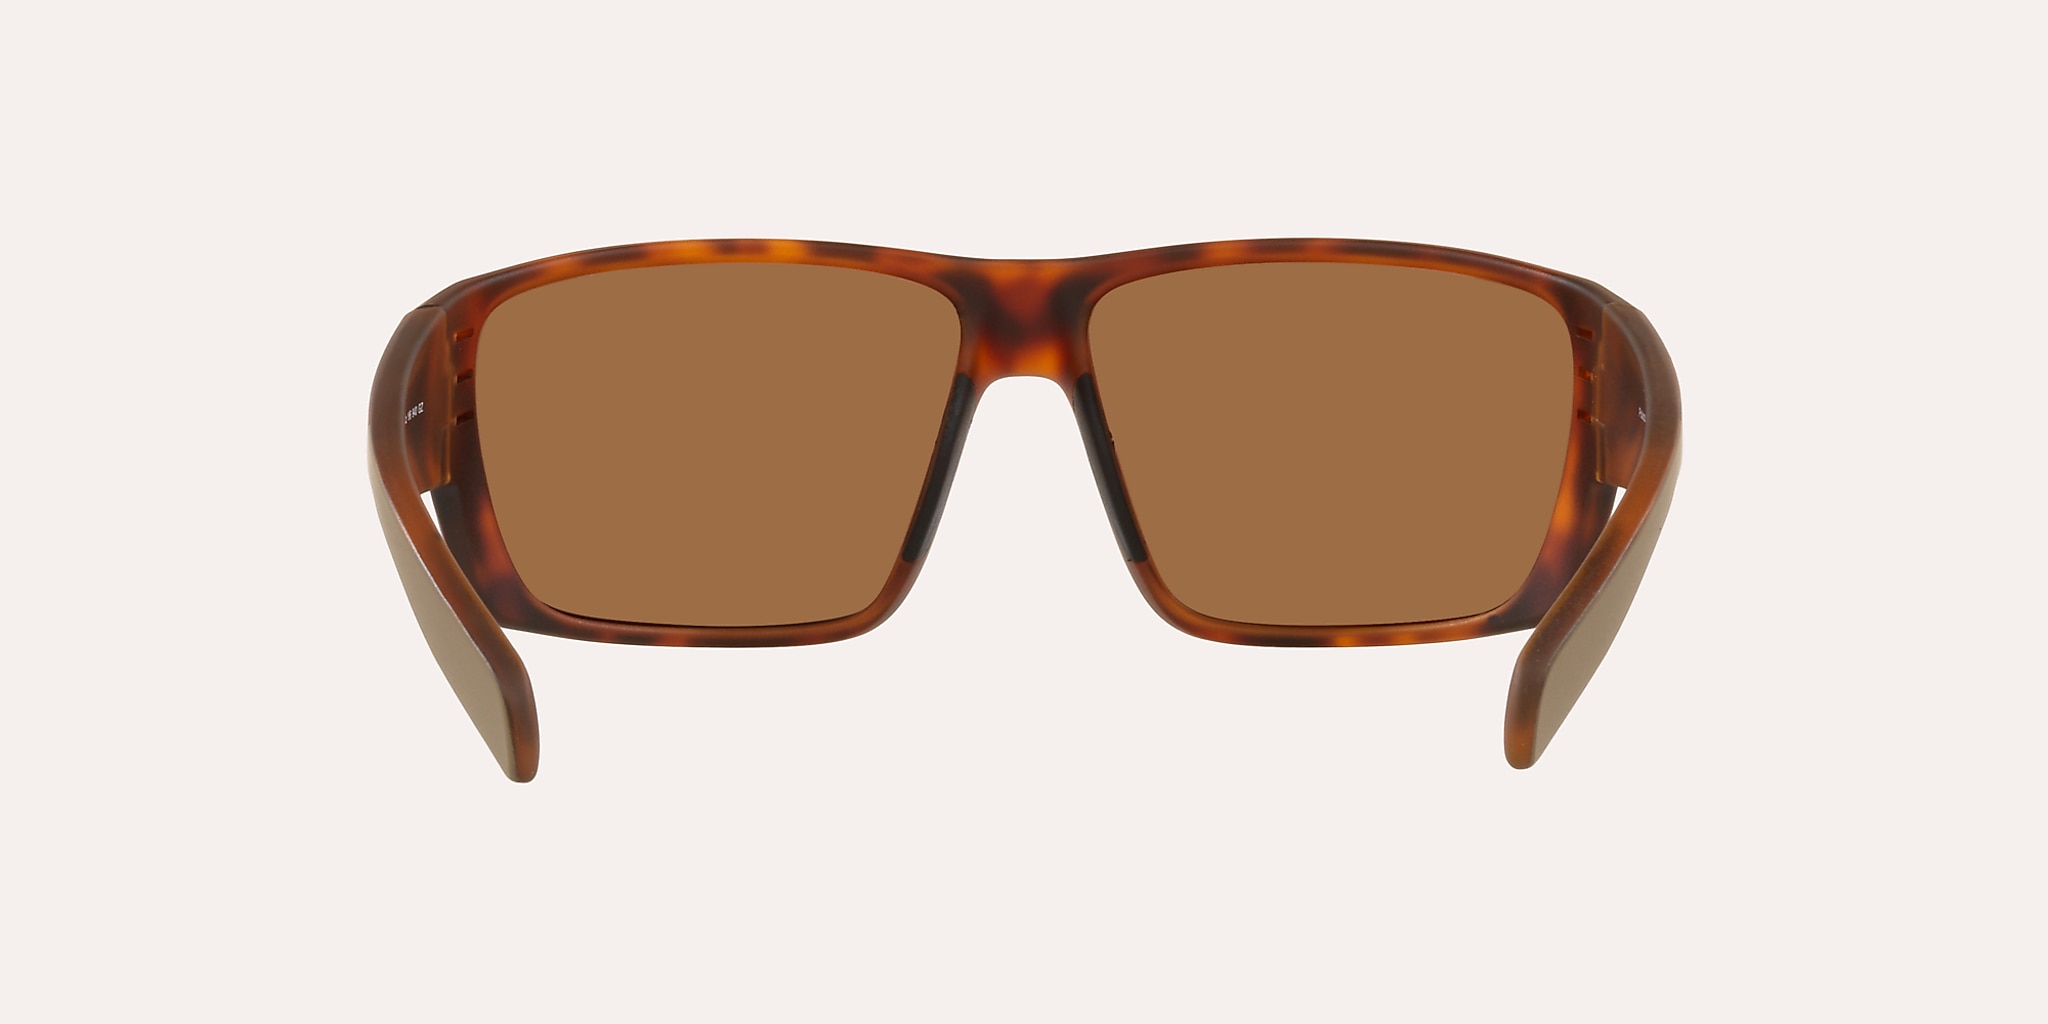 https://assets.nativeyewear.com/is/image/Native/764824019739_180A.png?impolicy=6S_resize&wid=2048&bgcolor=%23f5f0ee